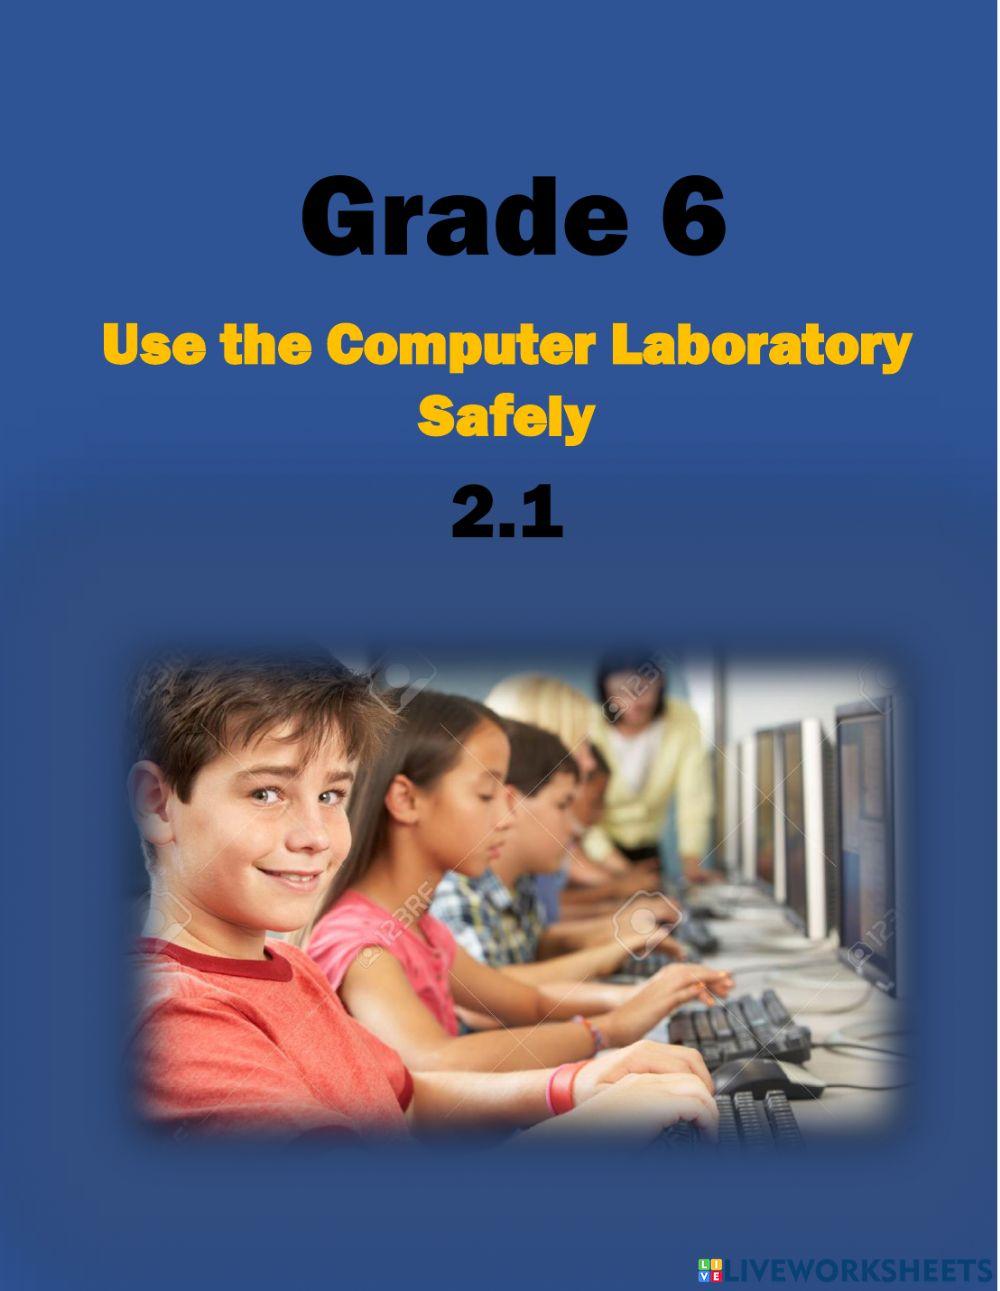 Use the Computer Laboratory Safely